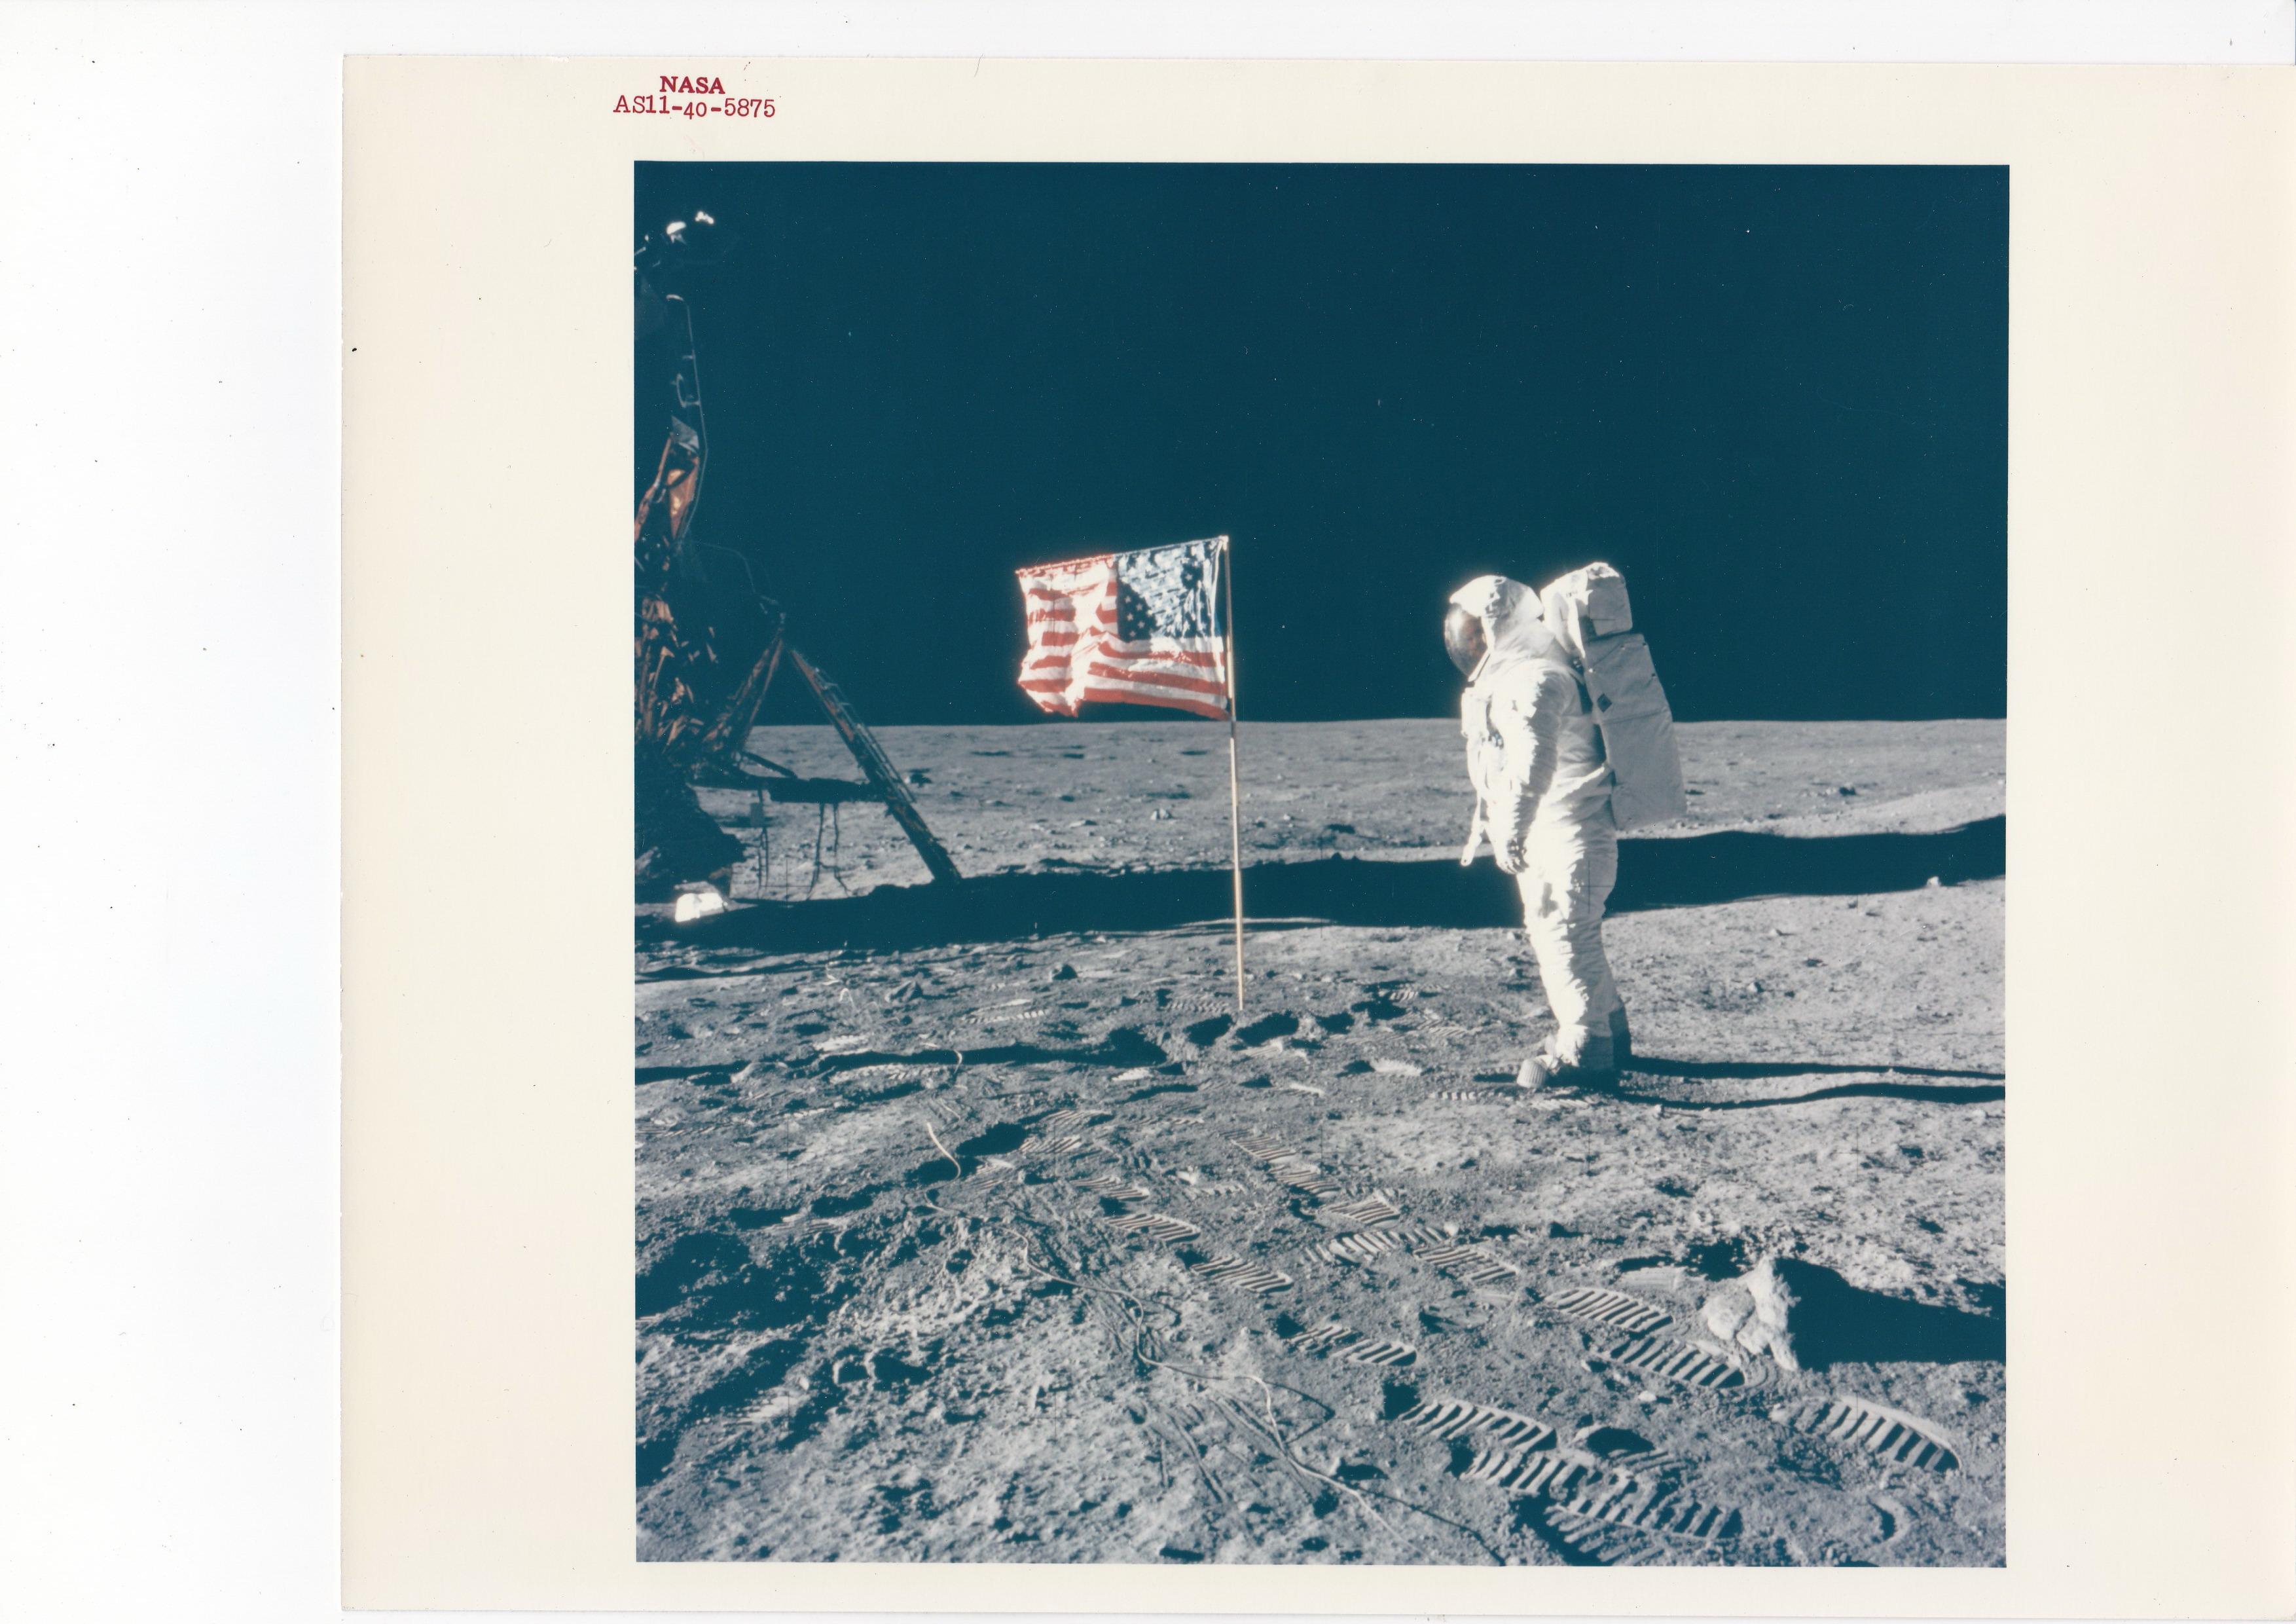 Unknown Color Photograph - Buzz Aldrin Besides the Flag photo by Neil Armstrong, Apollo 11, Vintage Print